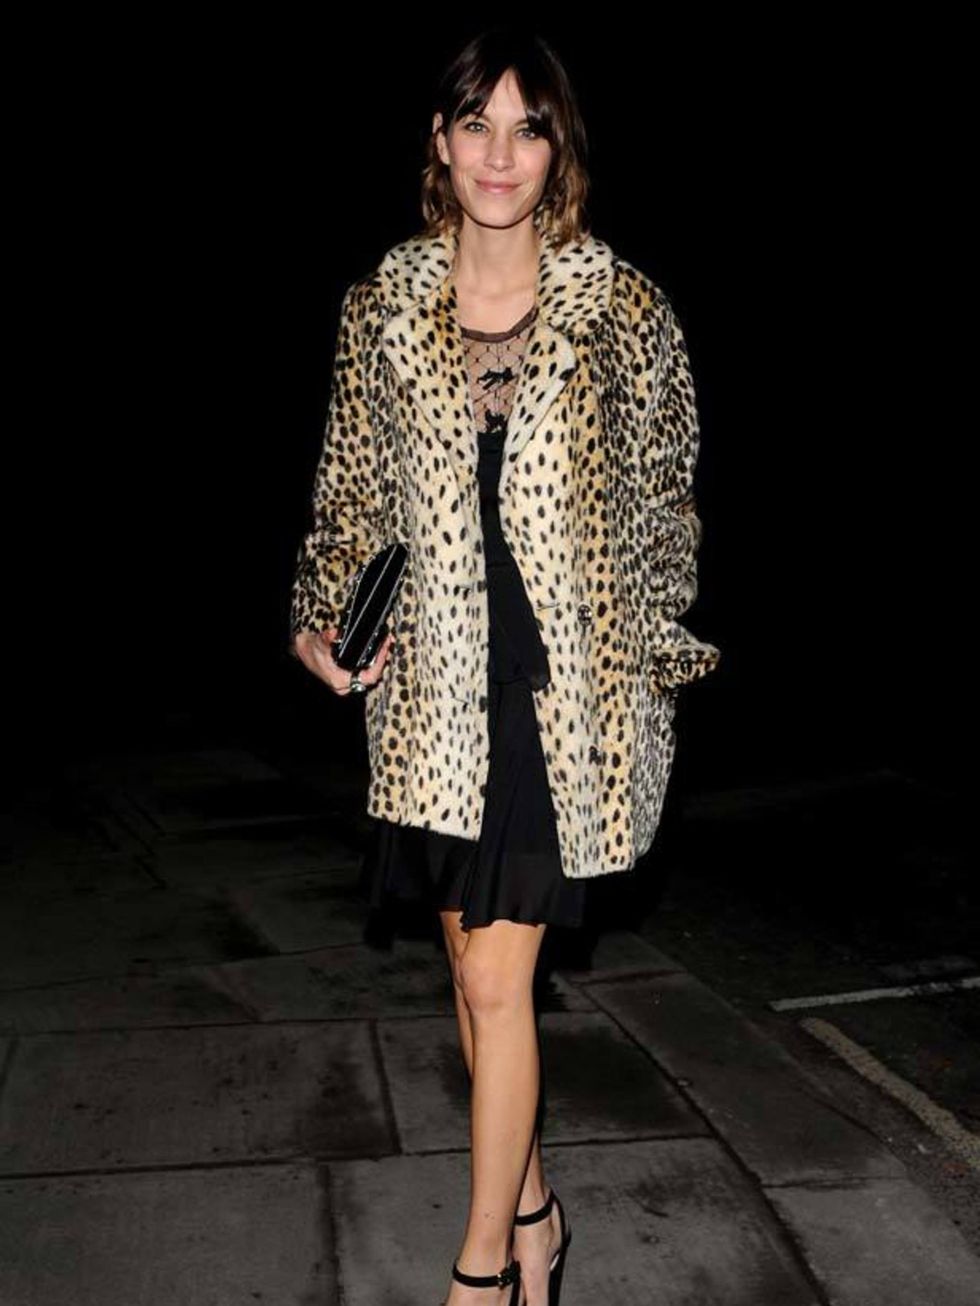 <p><a href="http://www.elleuk.com/starstyle/style-files/%28section%29/Alexa-Chung">Alexa Chung</a> wearing a chic cocktail dress and <a href="http://www.elleuk.com/catwalk/collections/charles-anastase/">Charles Anastase</a> shoes </p>